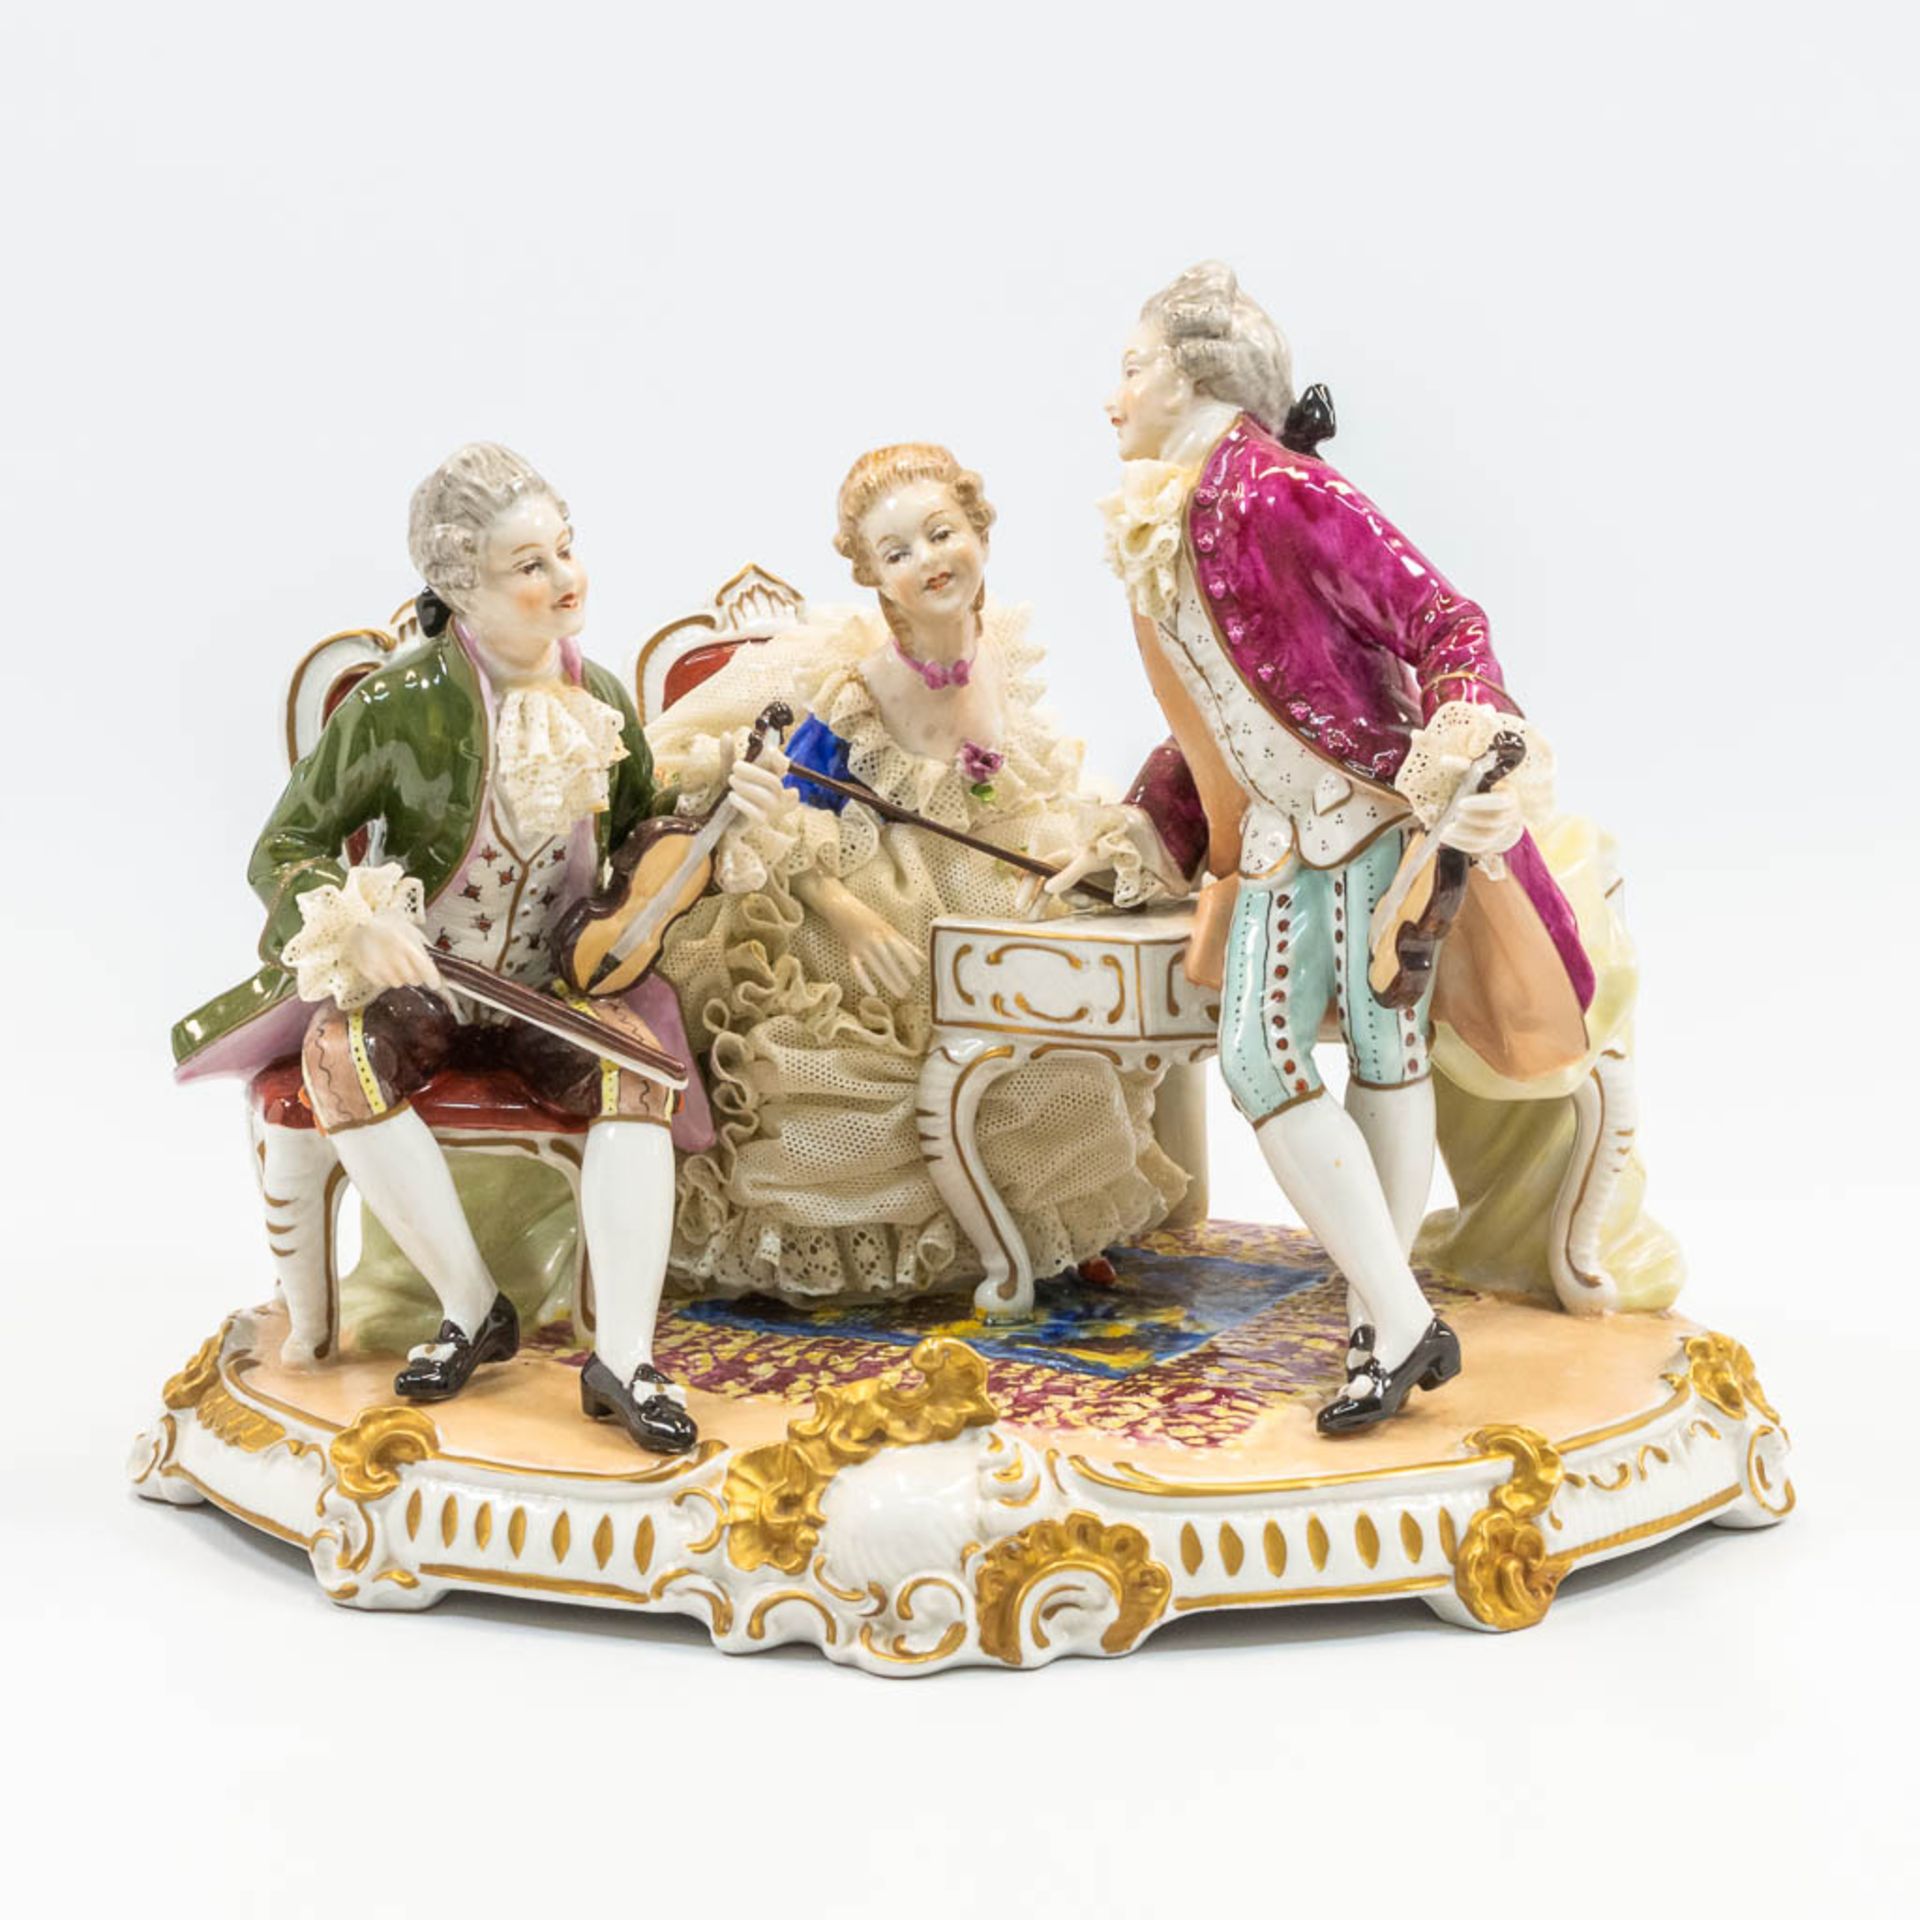 A collection of musicians, Unter Weiss Bach porcelain group. (22 x 29 x 21 cm)